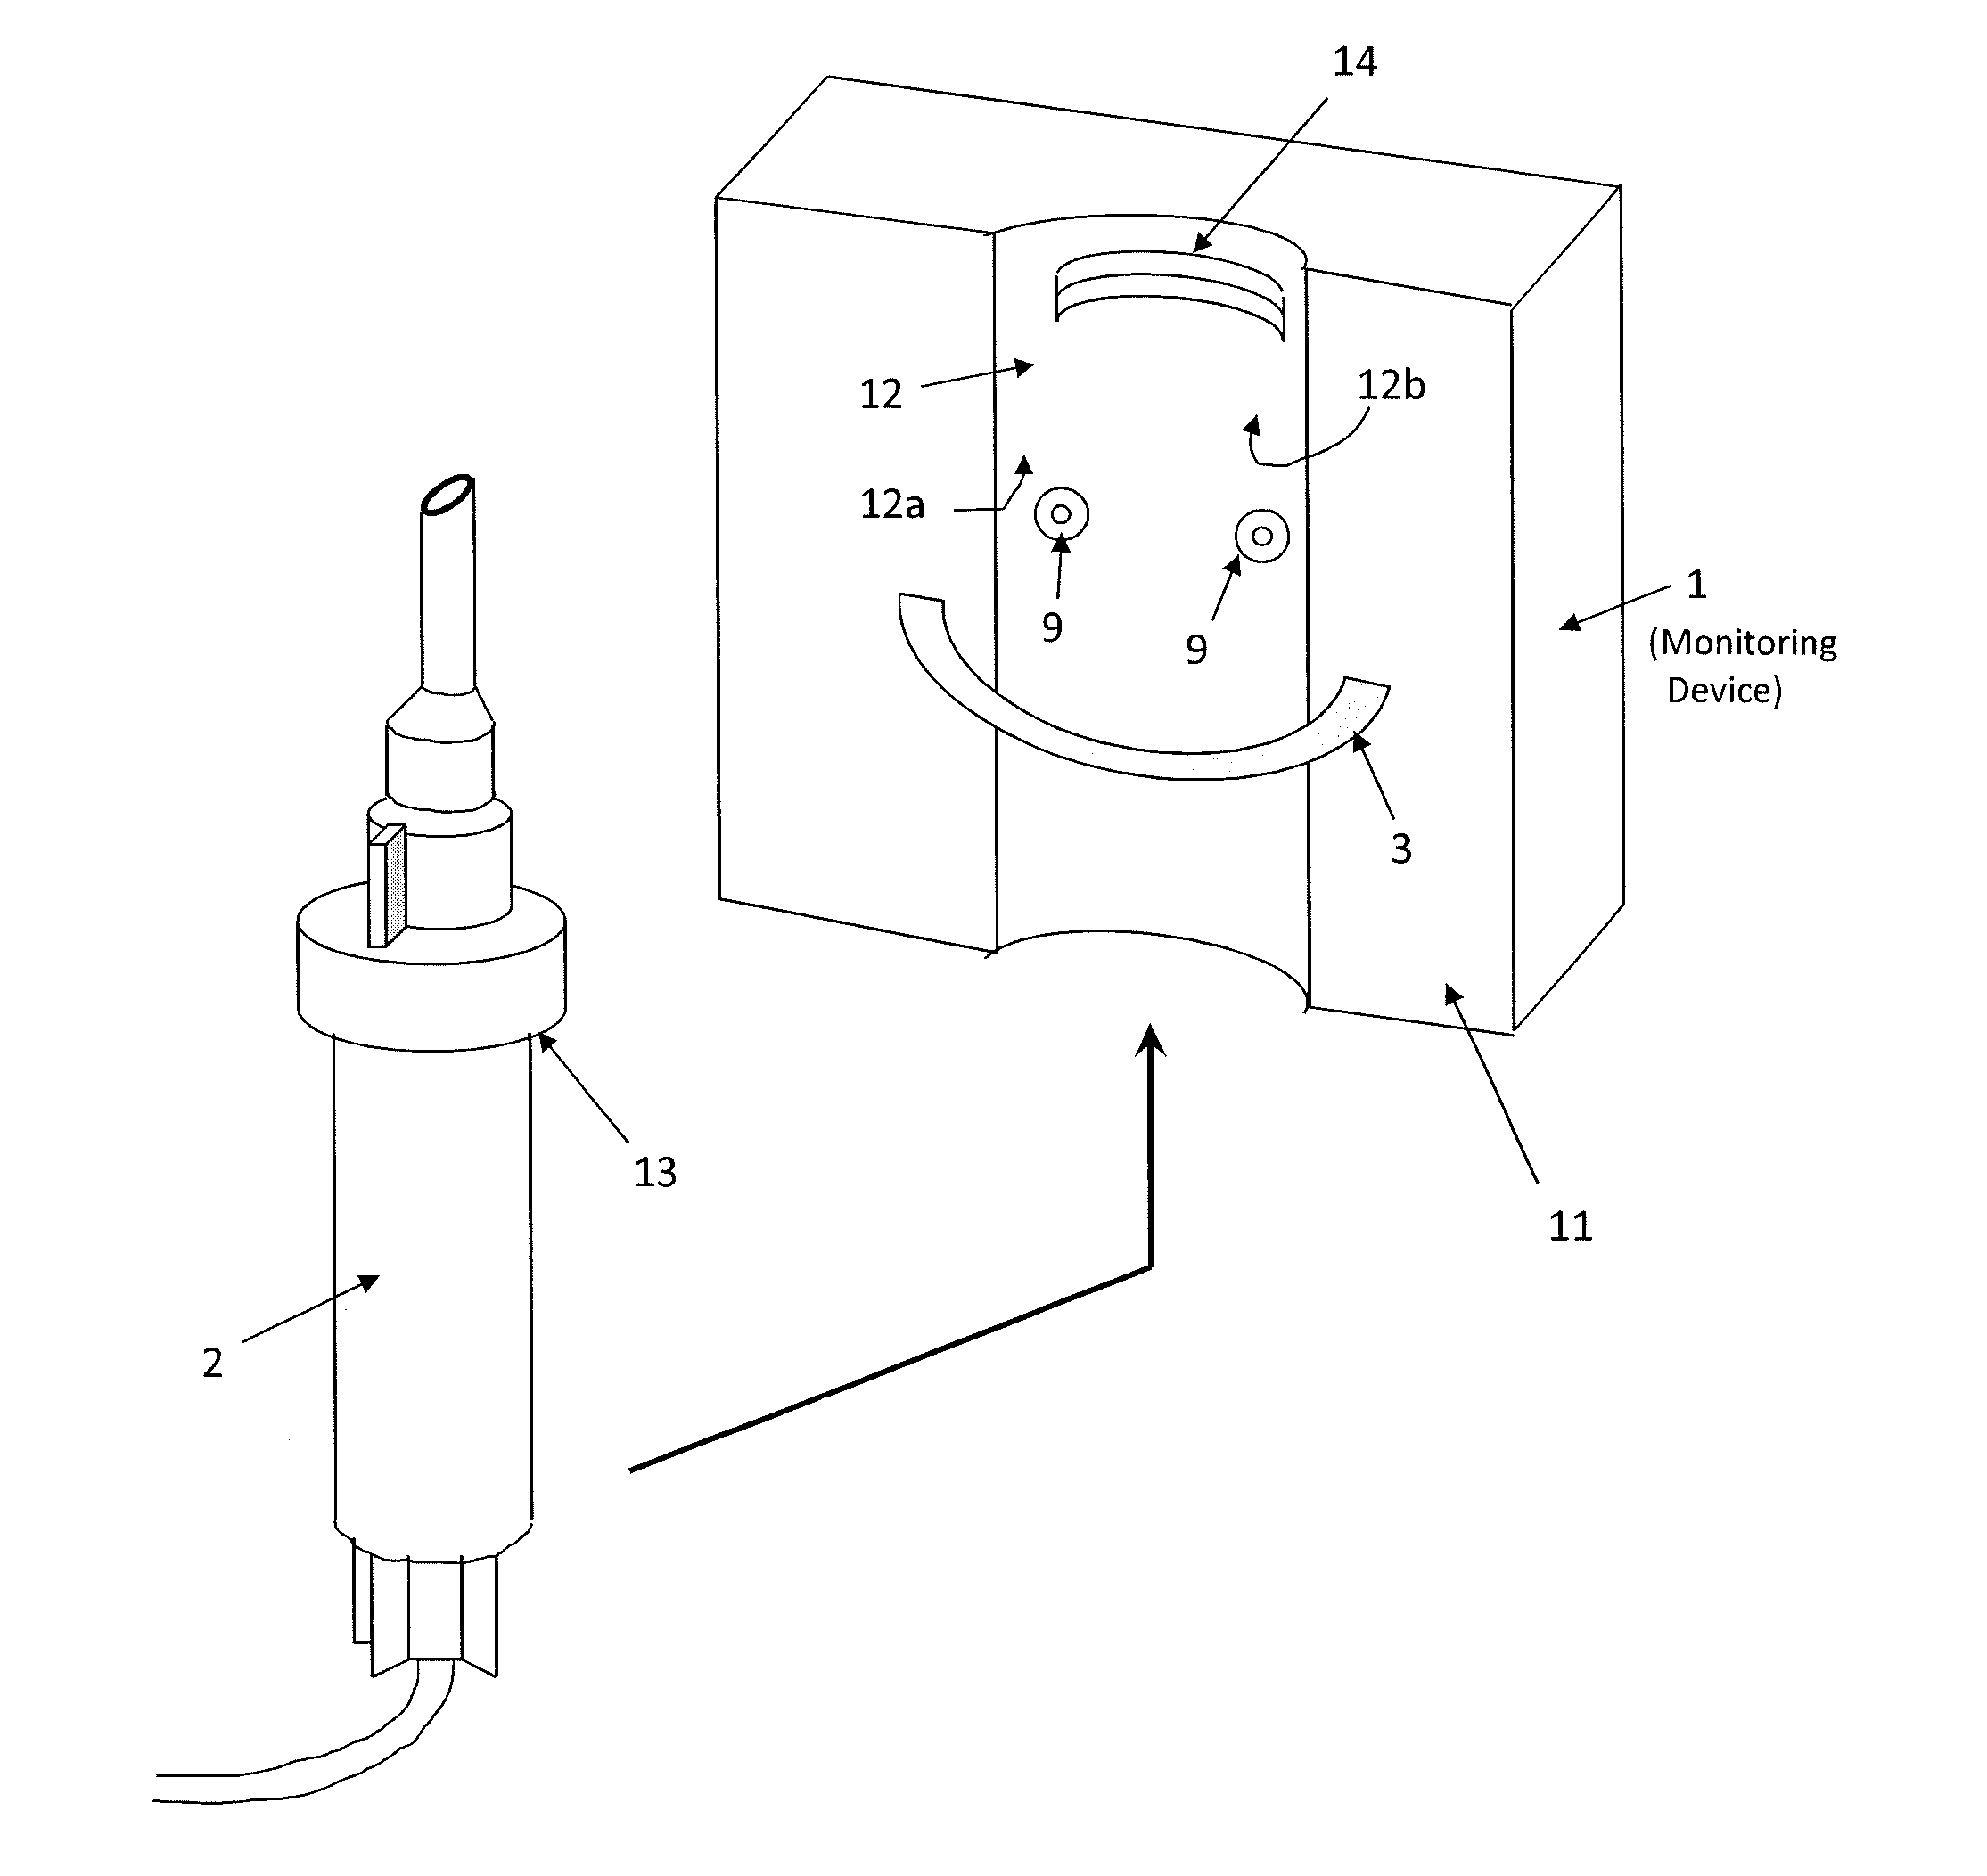 Automated intravenous monitoring device